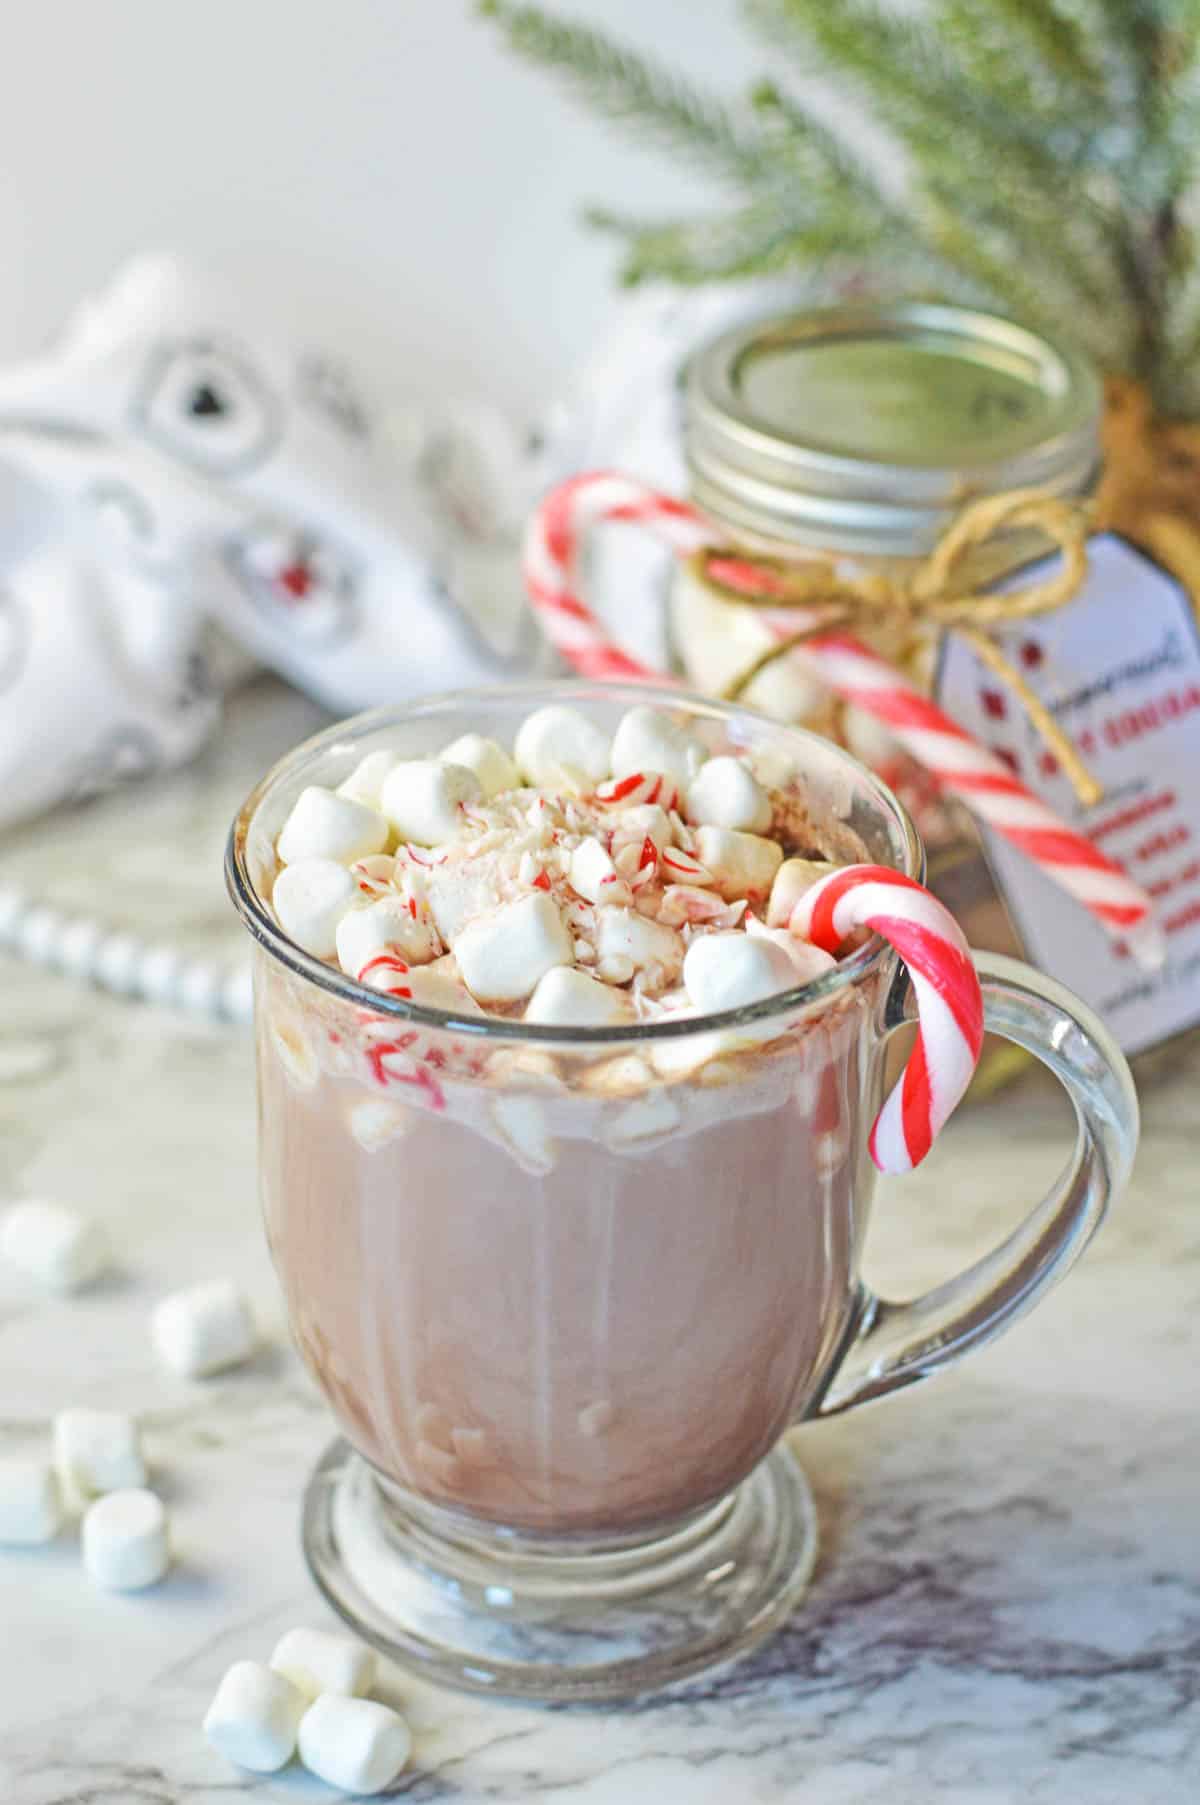 A glass mug filled with peppermint hot chocolate.